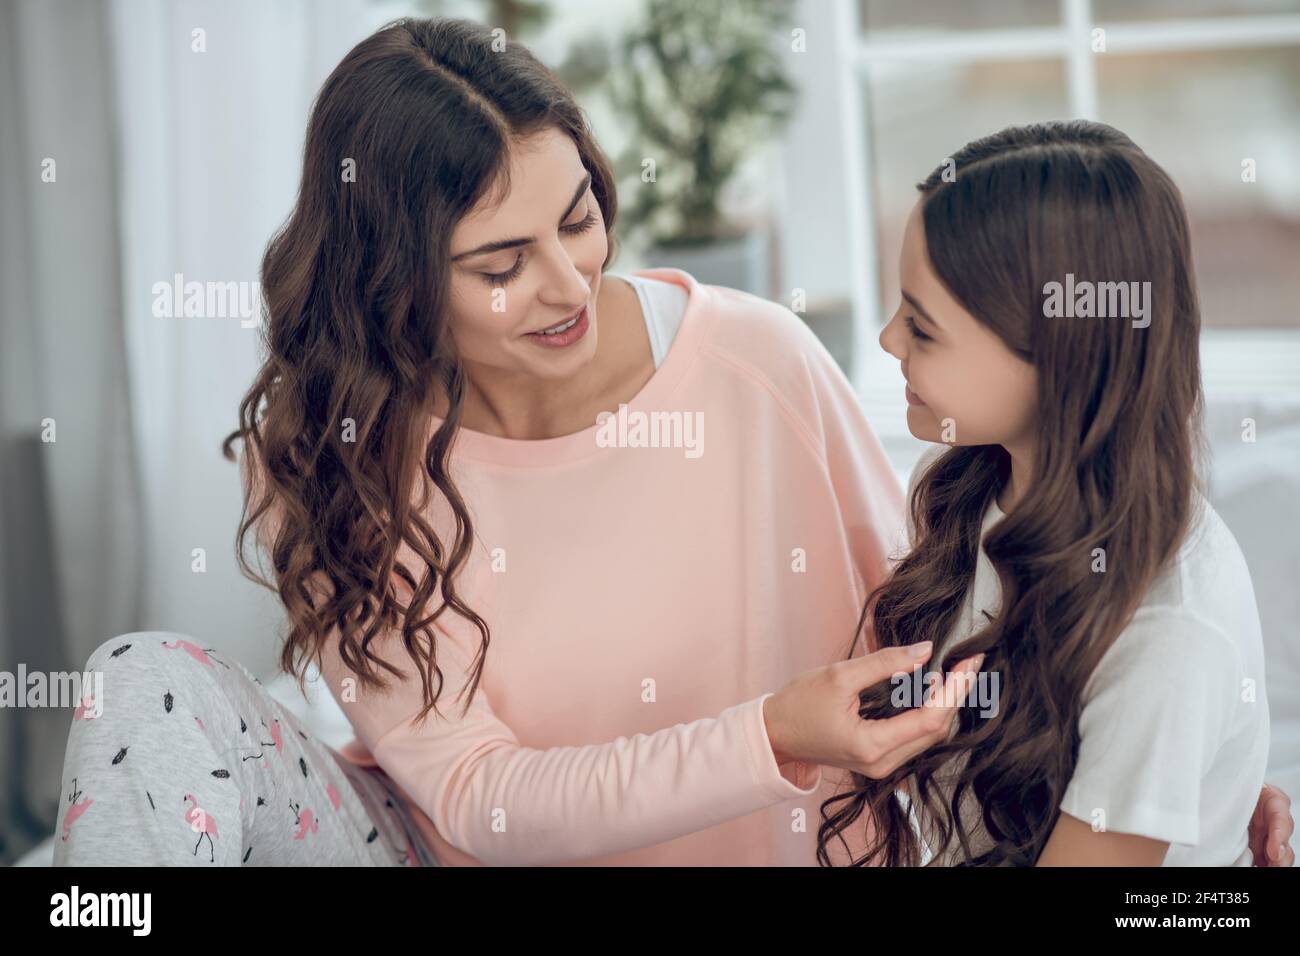 Smiling mom touching daughters long wavy hair Stock Photo